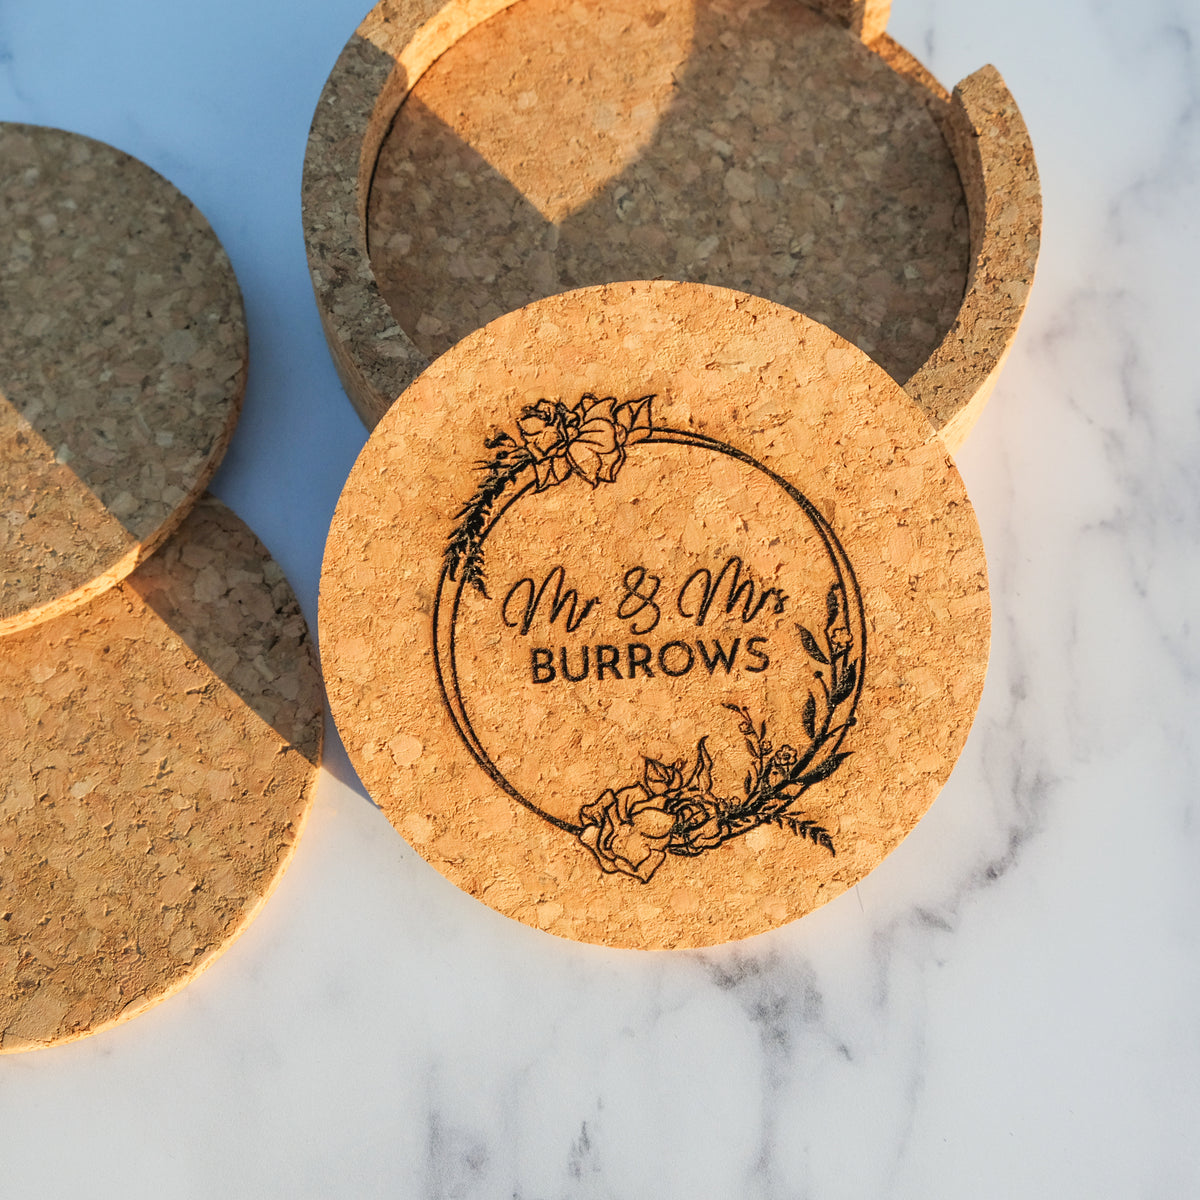 Christmas in the Country Cork Coasters - Set of 4